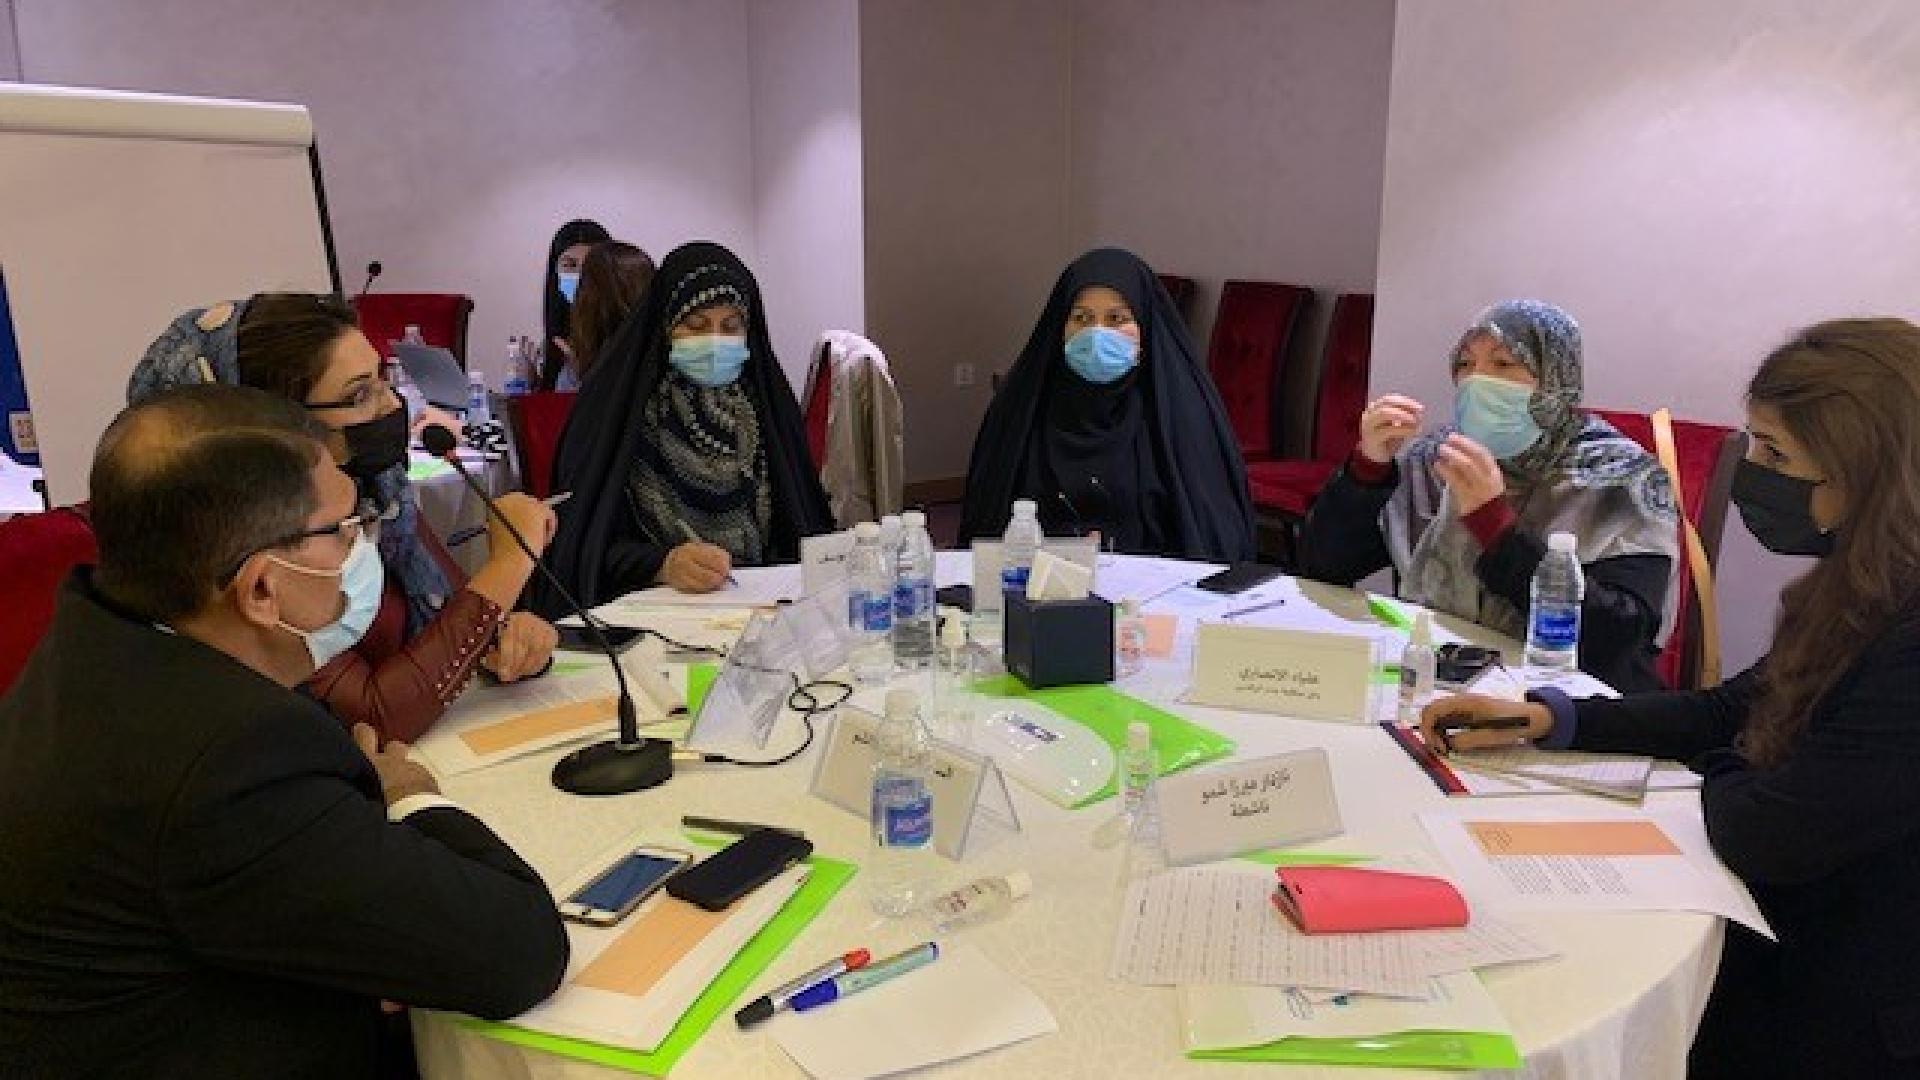 Voices of Women Empowerment UNDP and UN Women lead workshop on SGBV policies in Iraq United Nations Development Programme